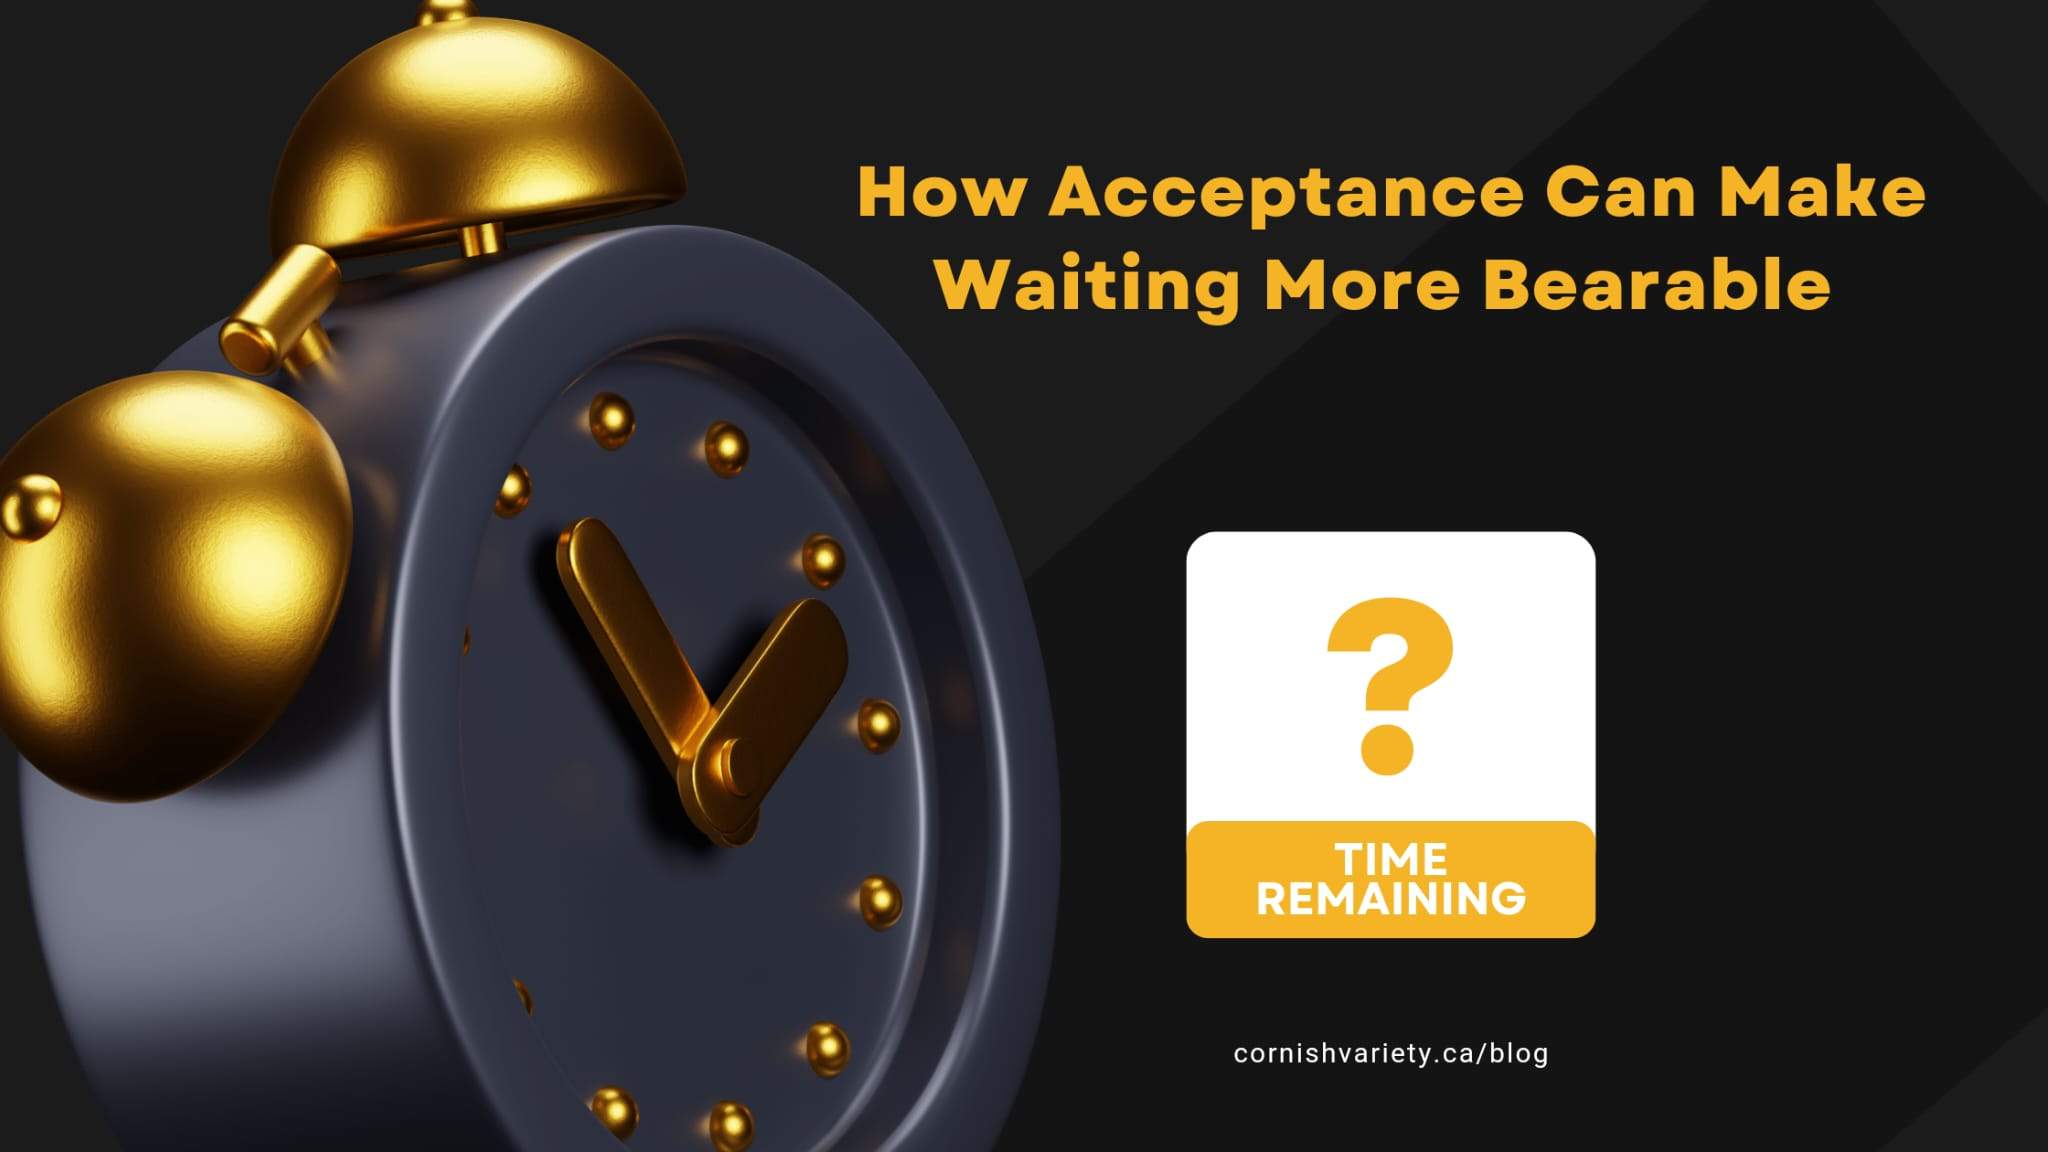 How Acceptance Can Make Waiting More Bearable